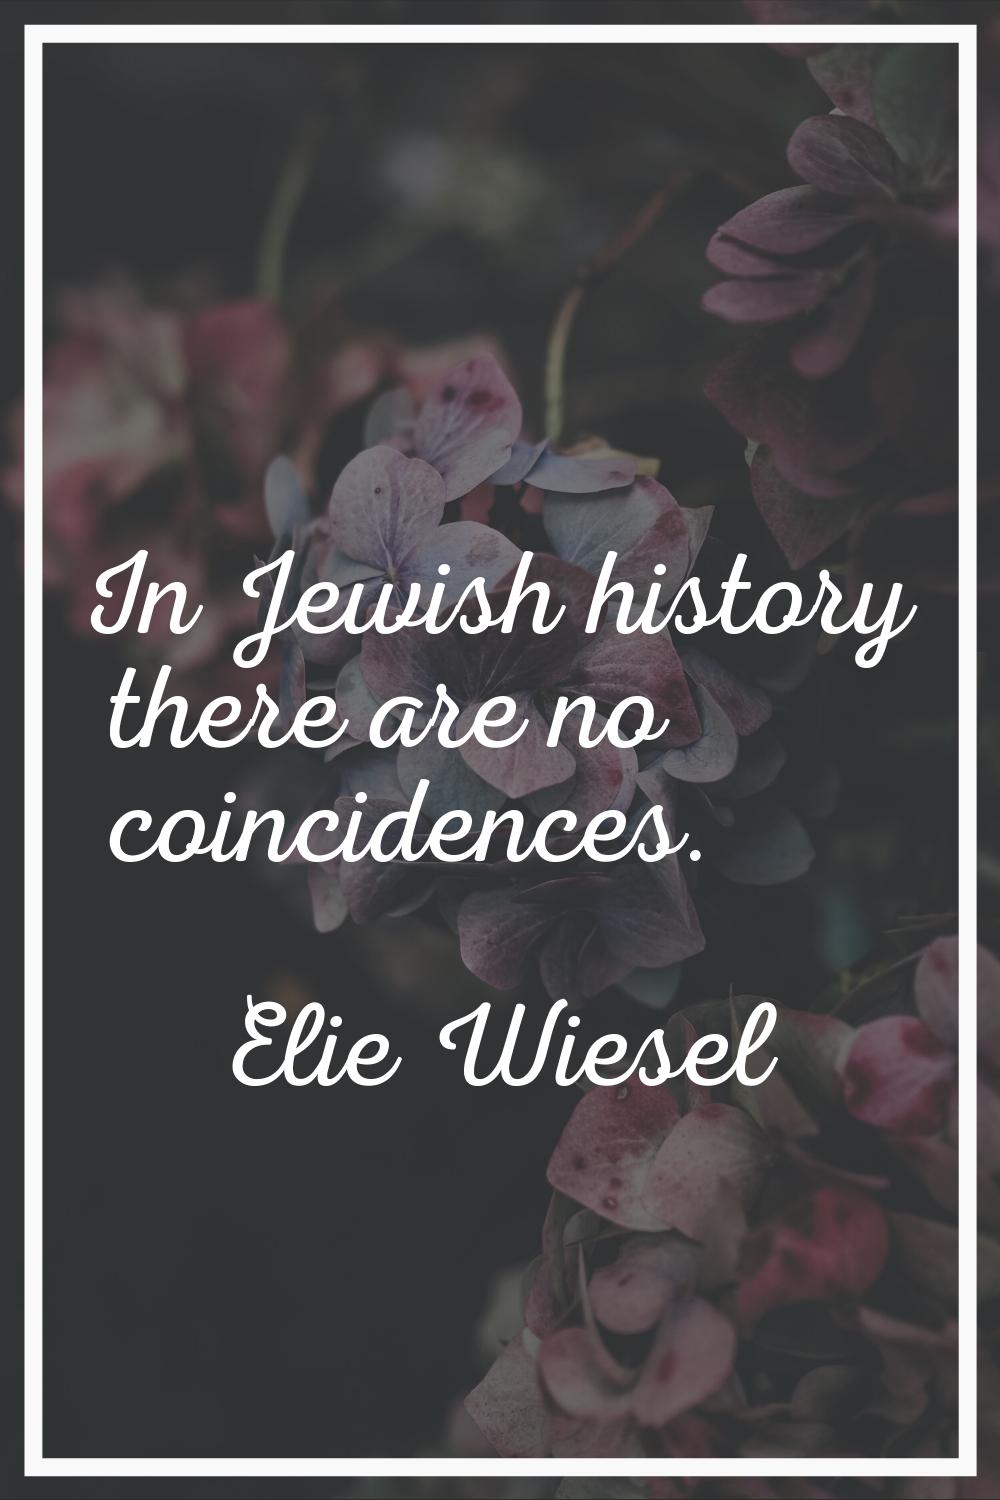 In Jewish history there are no coincidences.